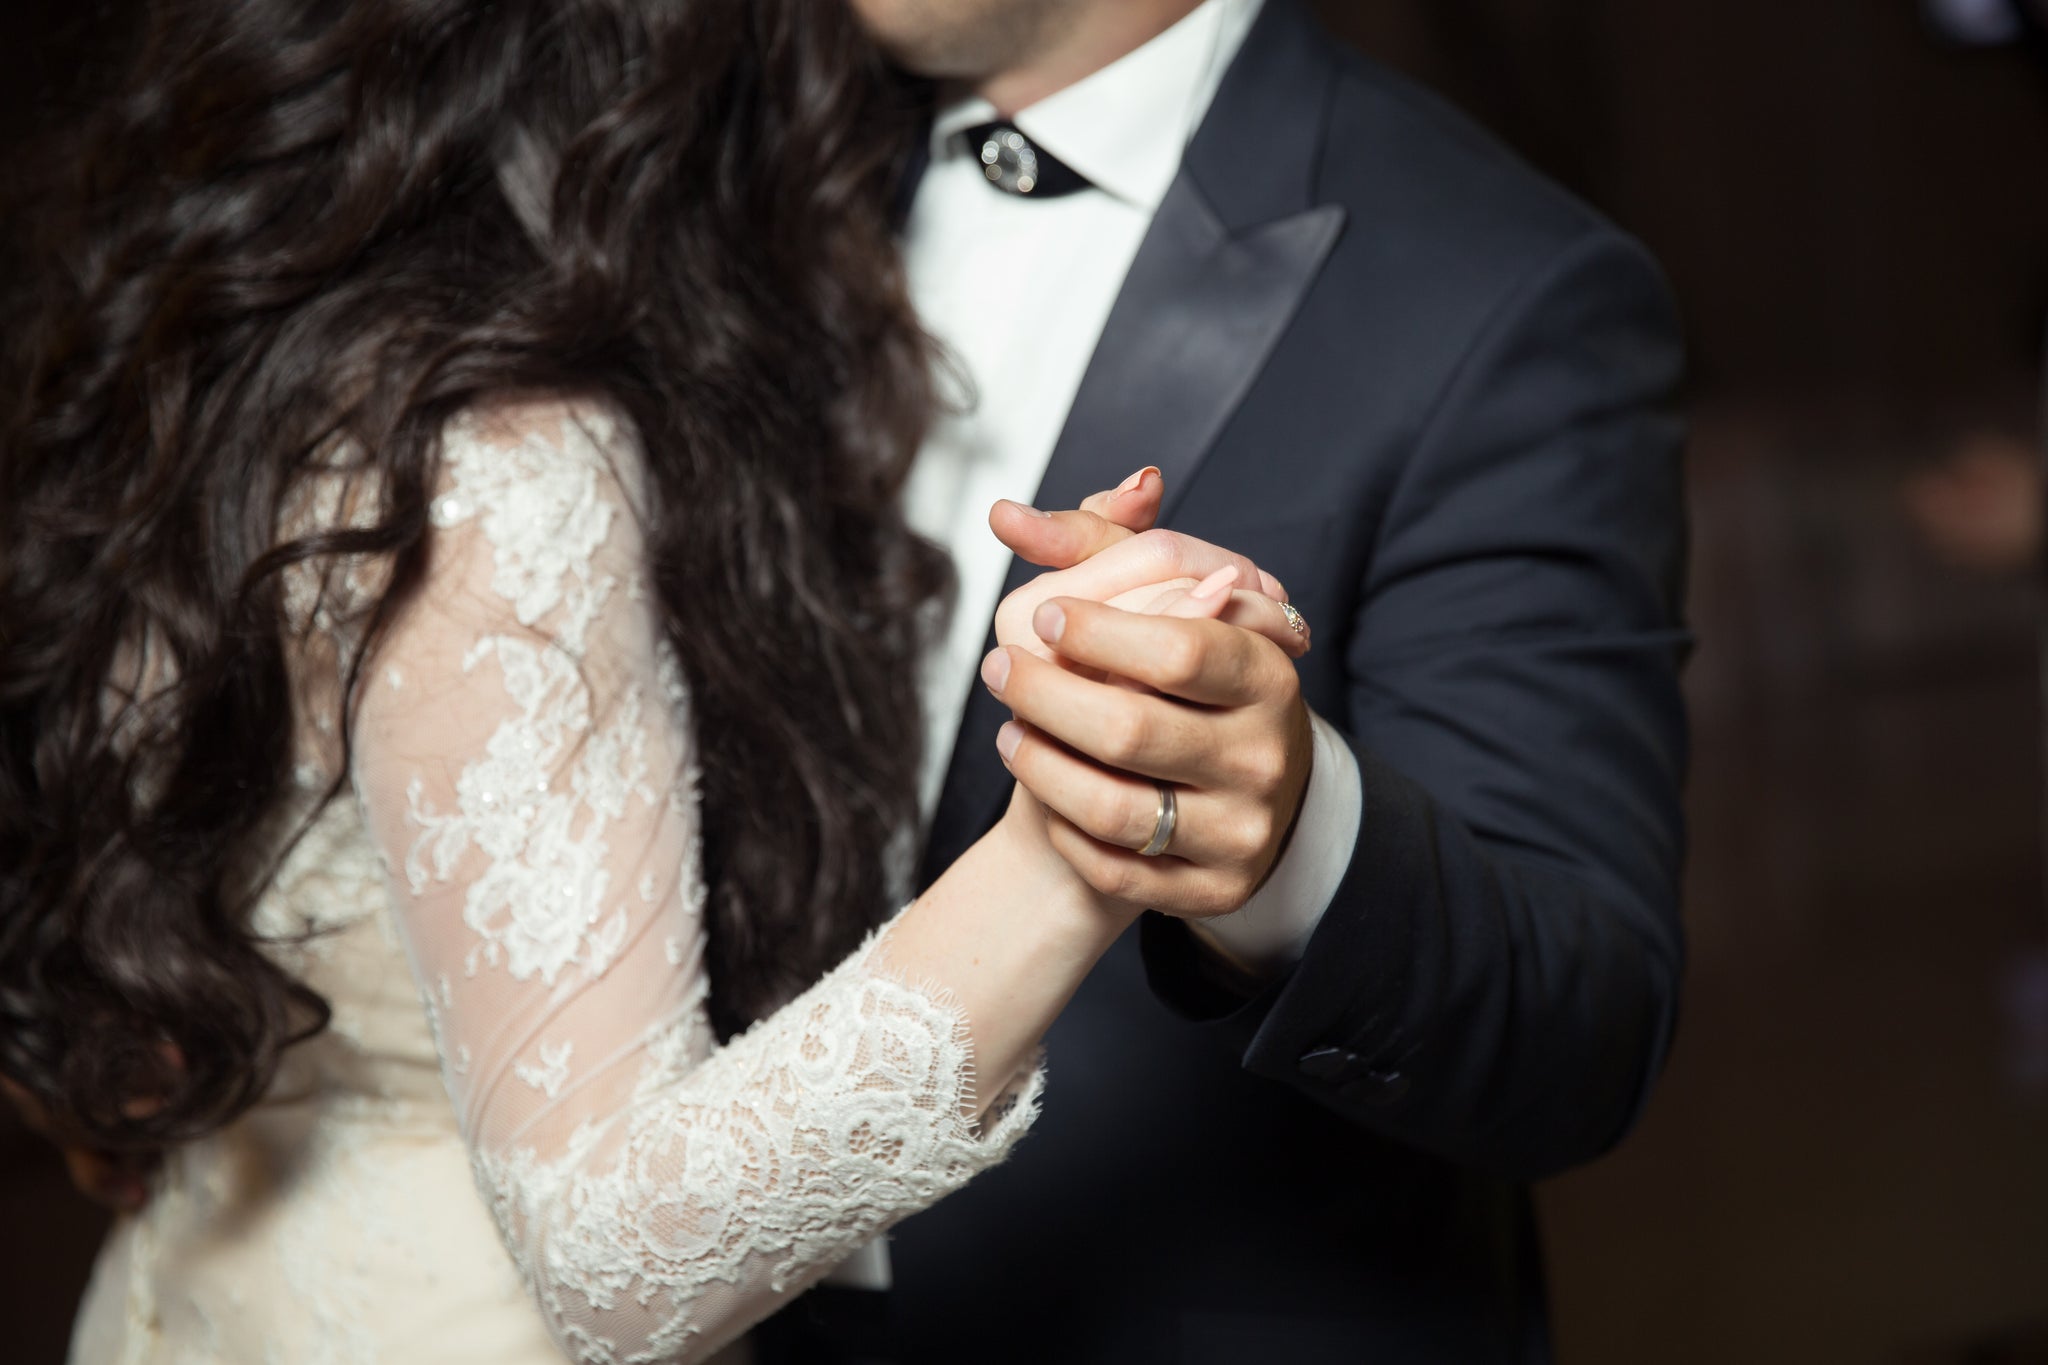 What to do when your parents try to control your wedding